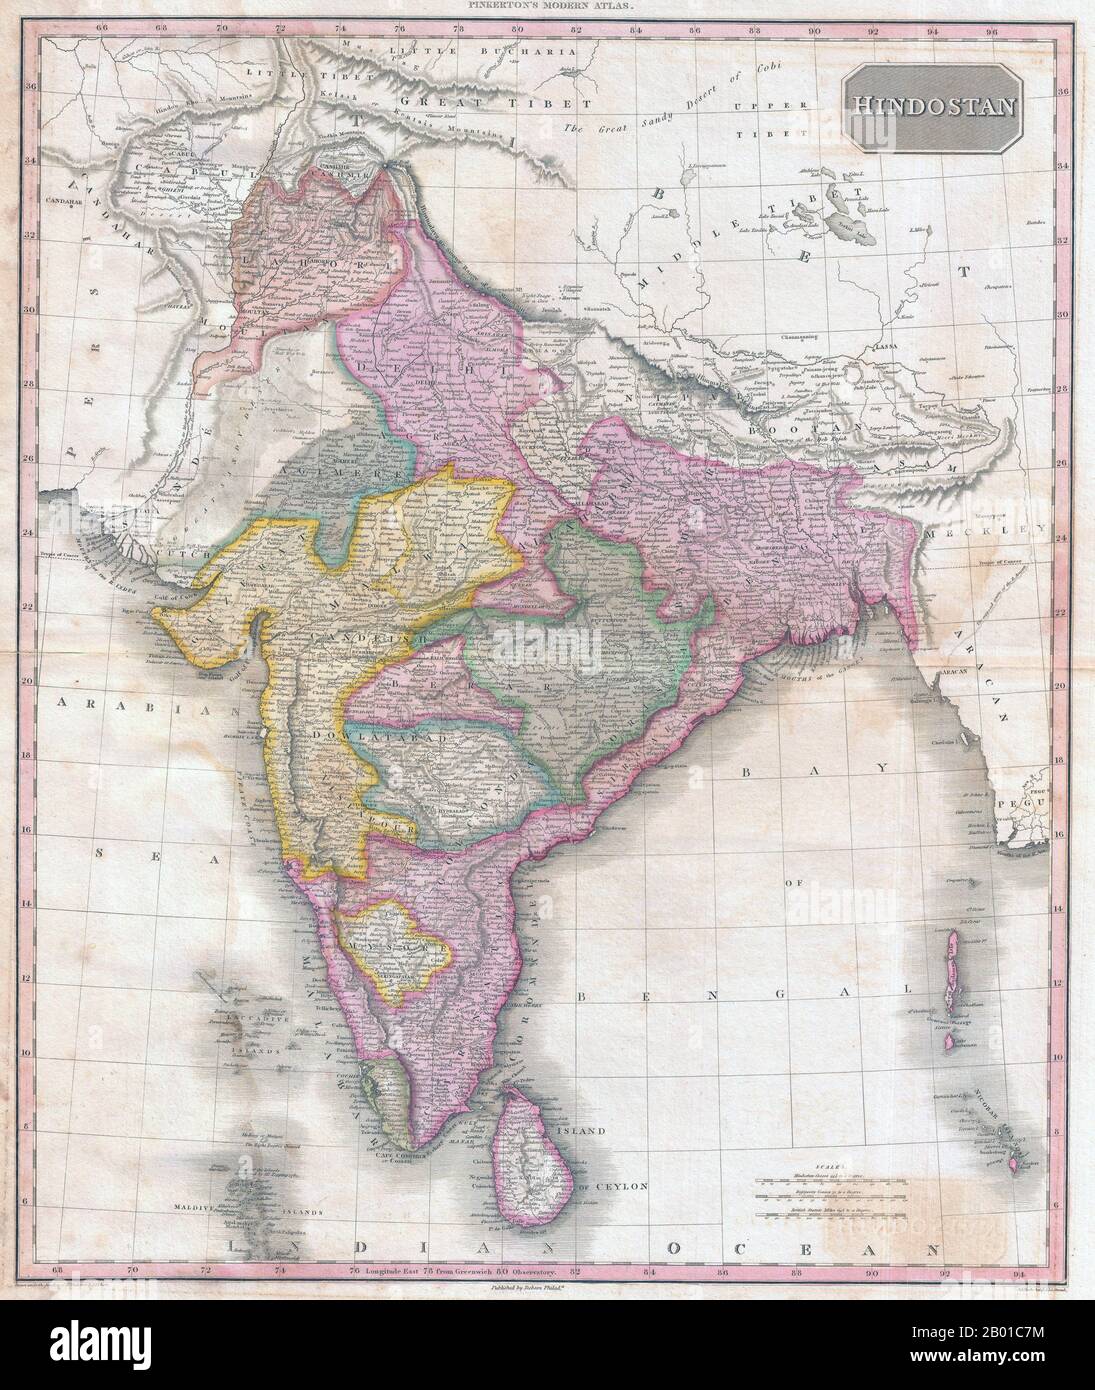 India/South Asia: Map of Hindostan showing British Raj by John Pinkerton (17 Februar 1758 - 10 March 1826), c. 1818.  Map of Hindostan from Pinkerton's Modern Atlas, early 19th century. It covers the subcontinent from Tibet to Ceylon (Sri Lanka) and from the mouth of the Indus to the Kingdom of Pegu (Burma/Myanmar). The map also colour codes various political divisions and princely states. Stock Photo